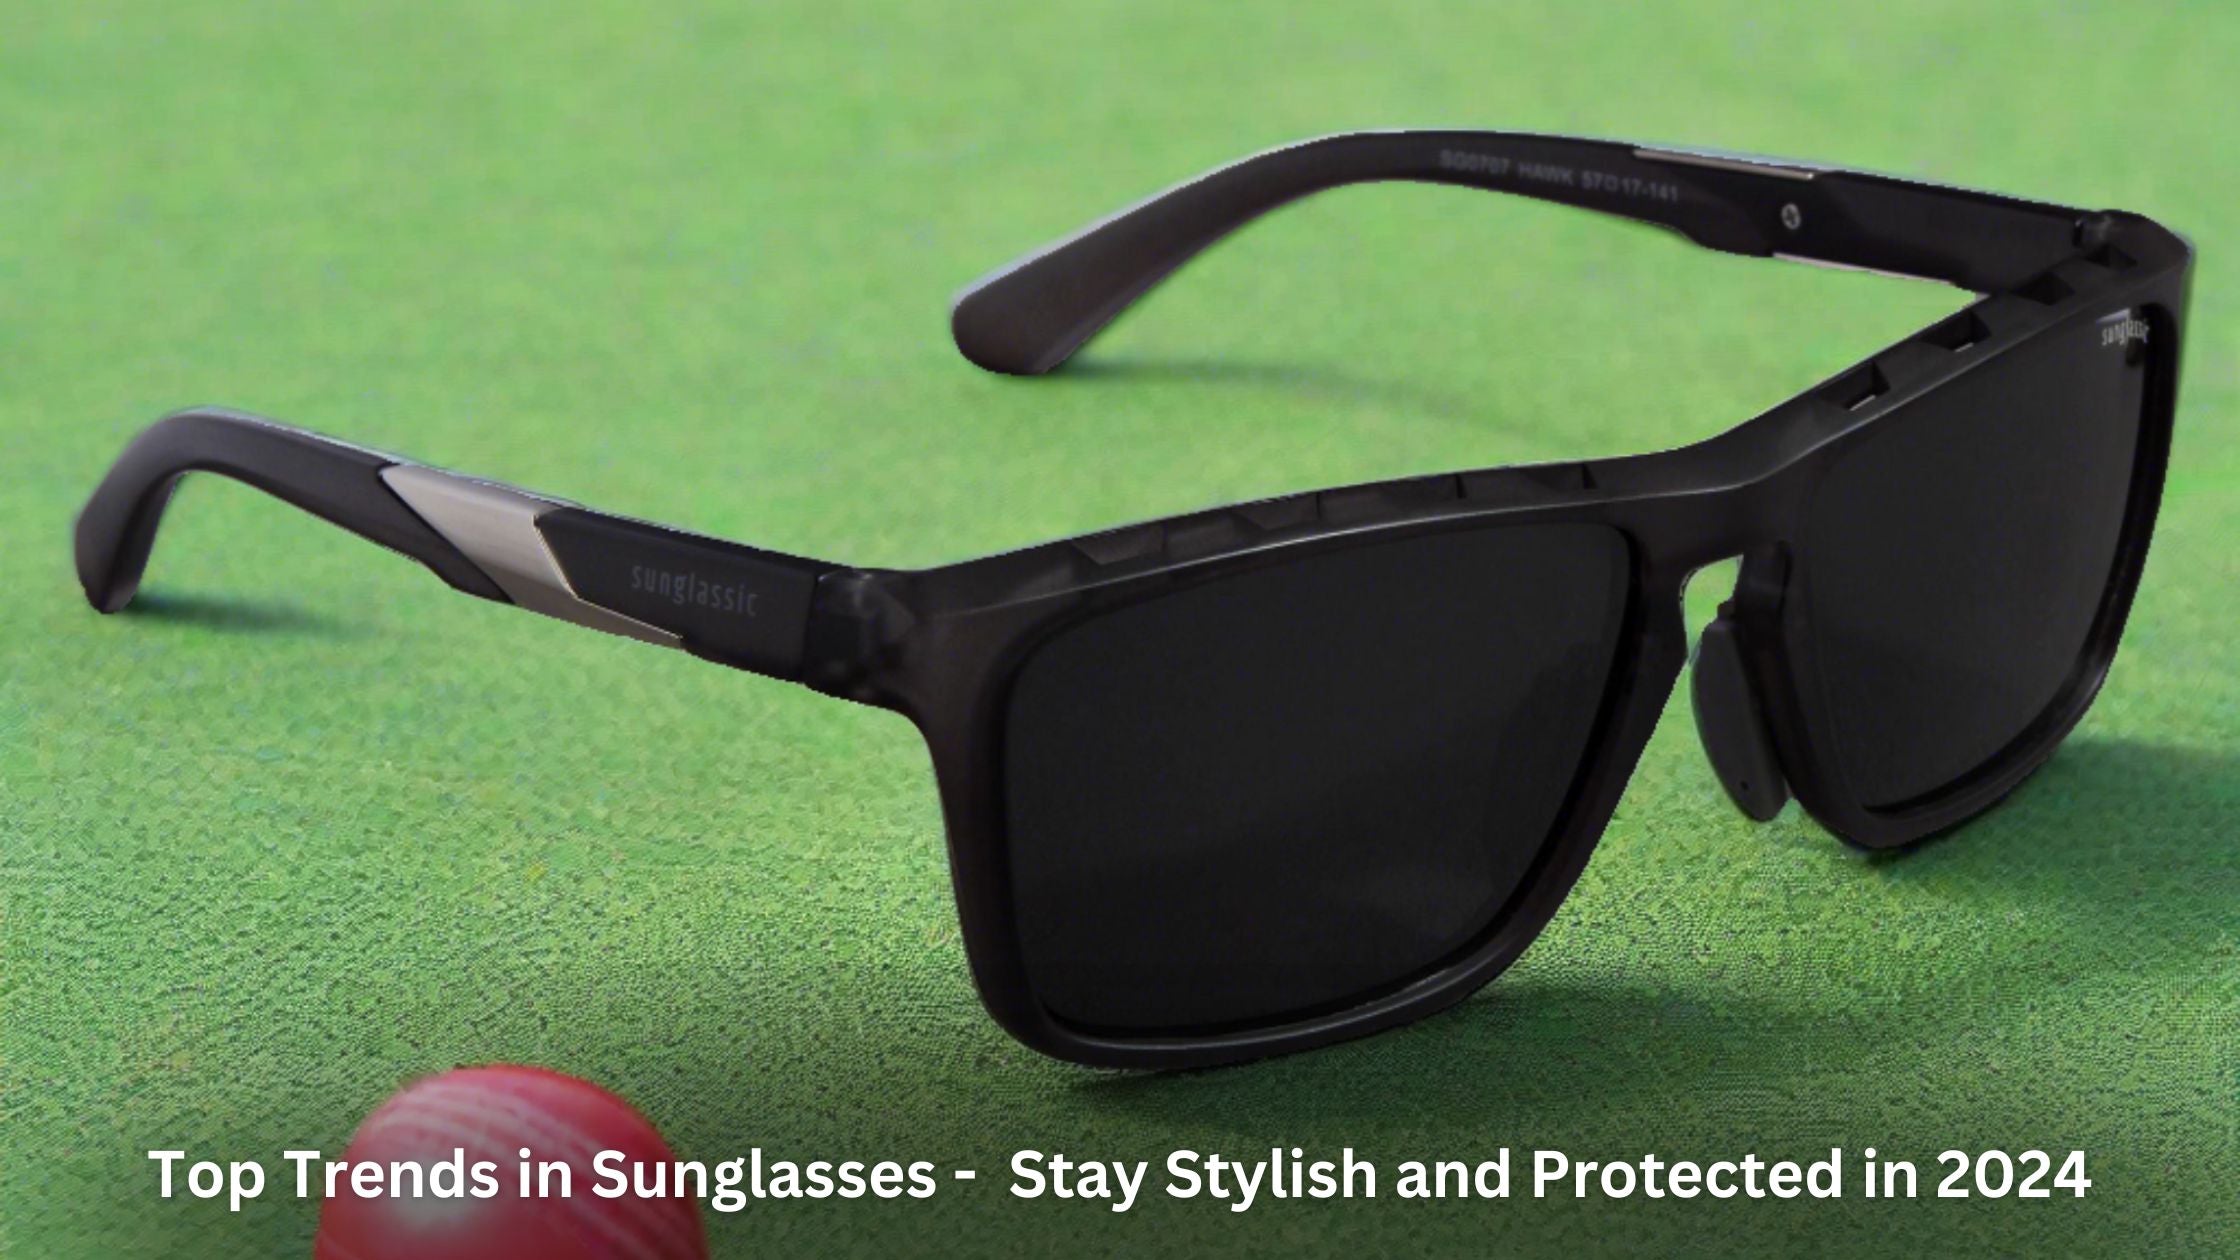 Top Trends in Sunglasses: Stay Stylish and Protected in 2024